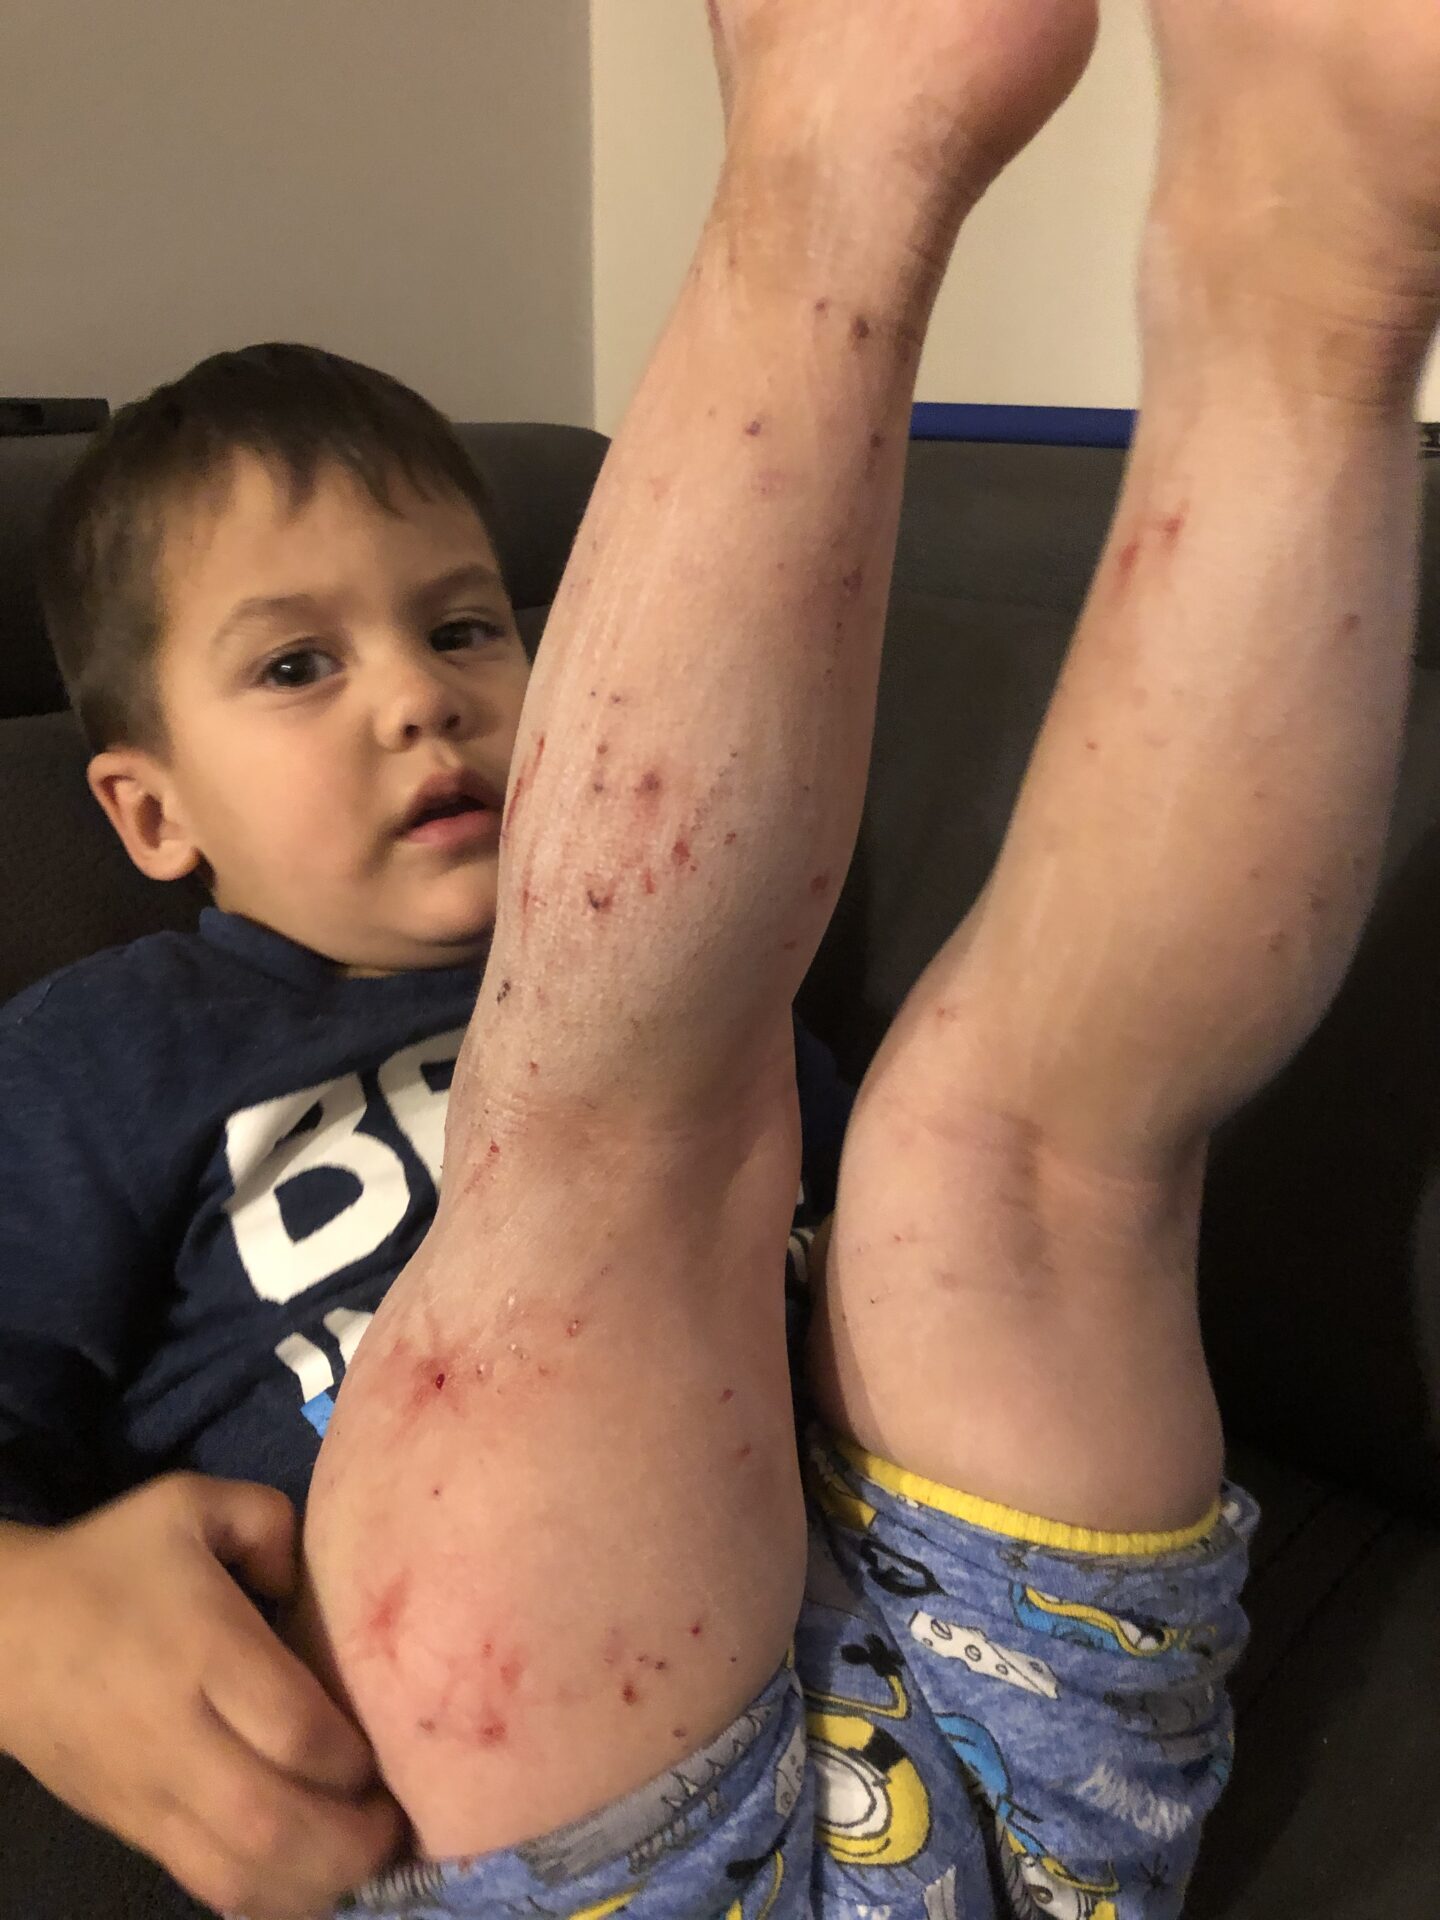 child with pruritus and scratching injuries